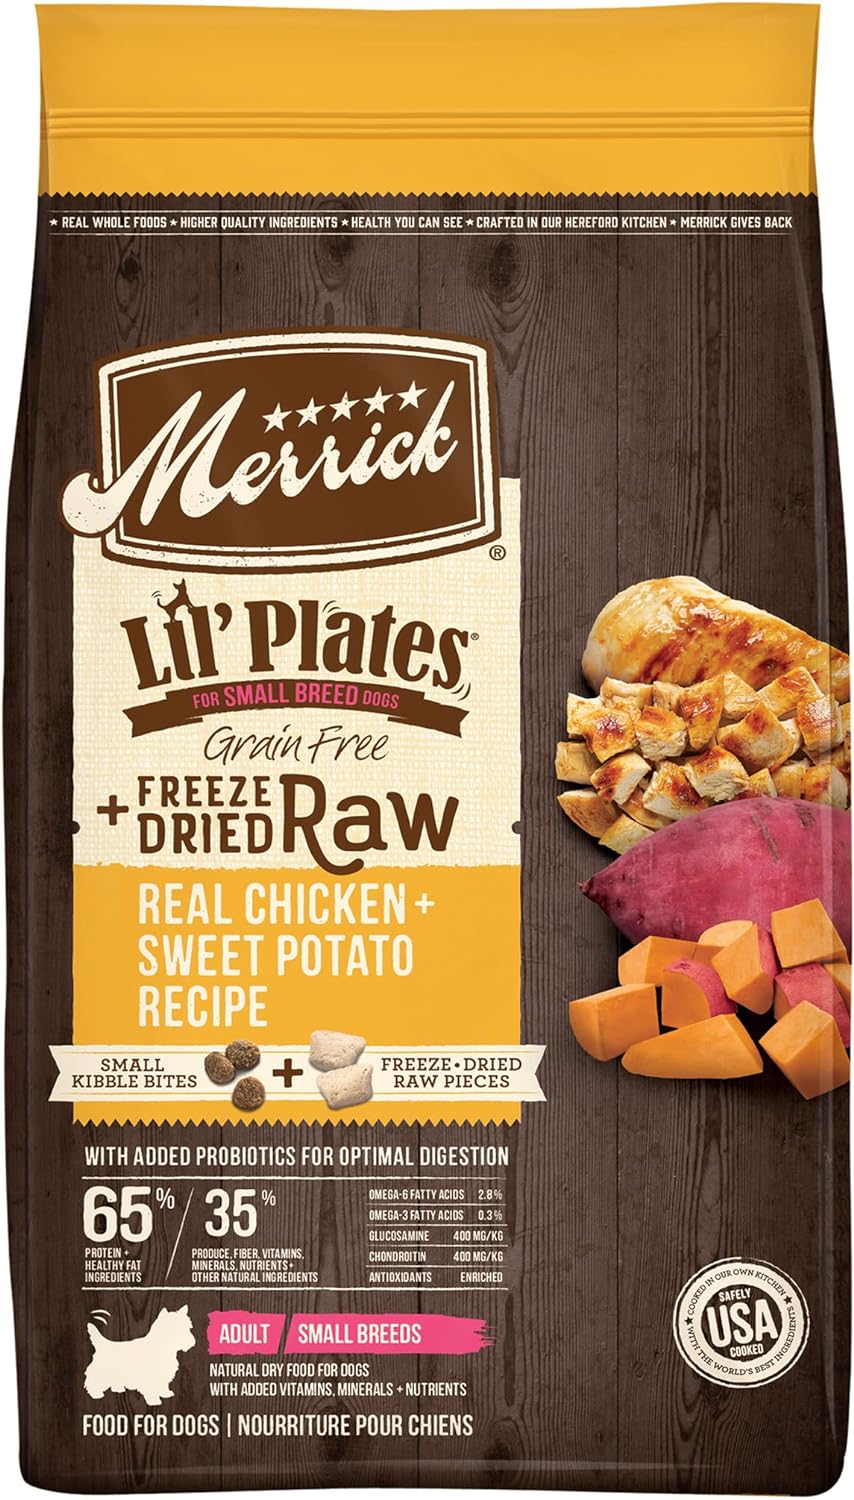 Merrick Lil’ Plates Grain-Free Real Chicken + Sweet Potato with Raw Bites Recipe Dry Dog Food – Gallery Image 1